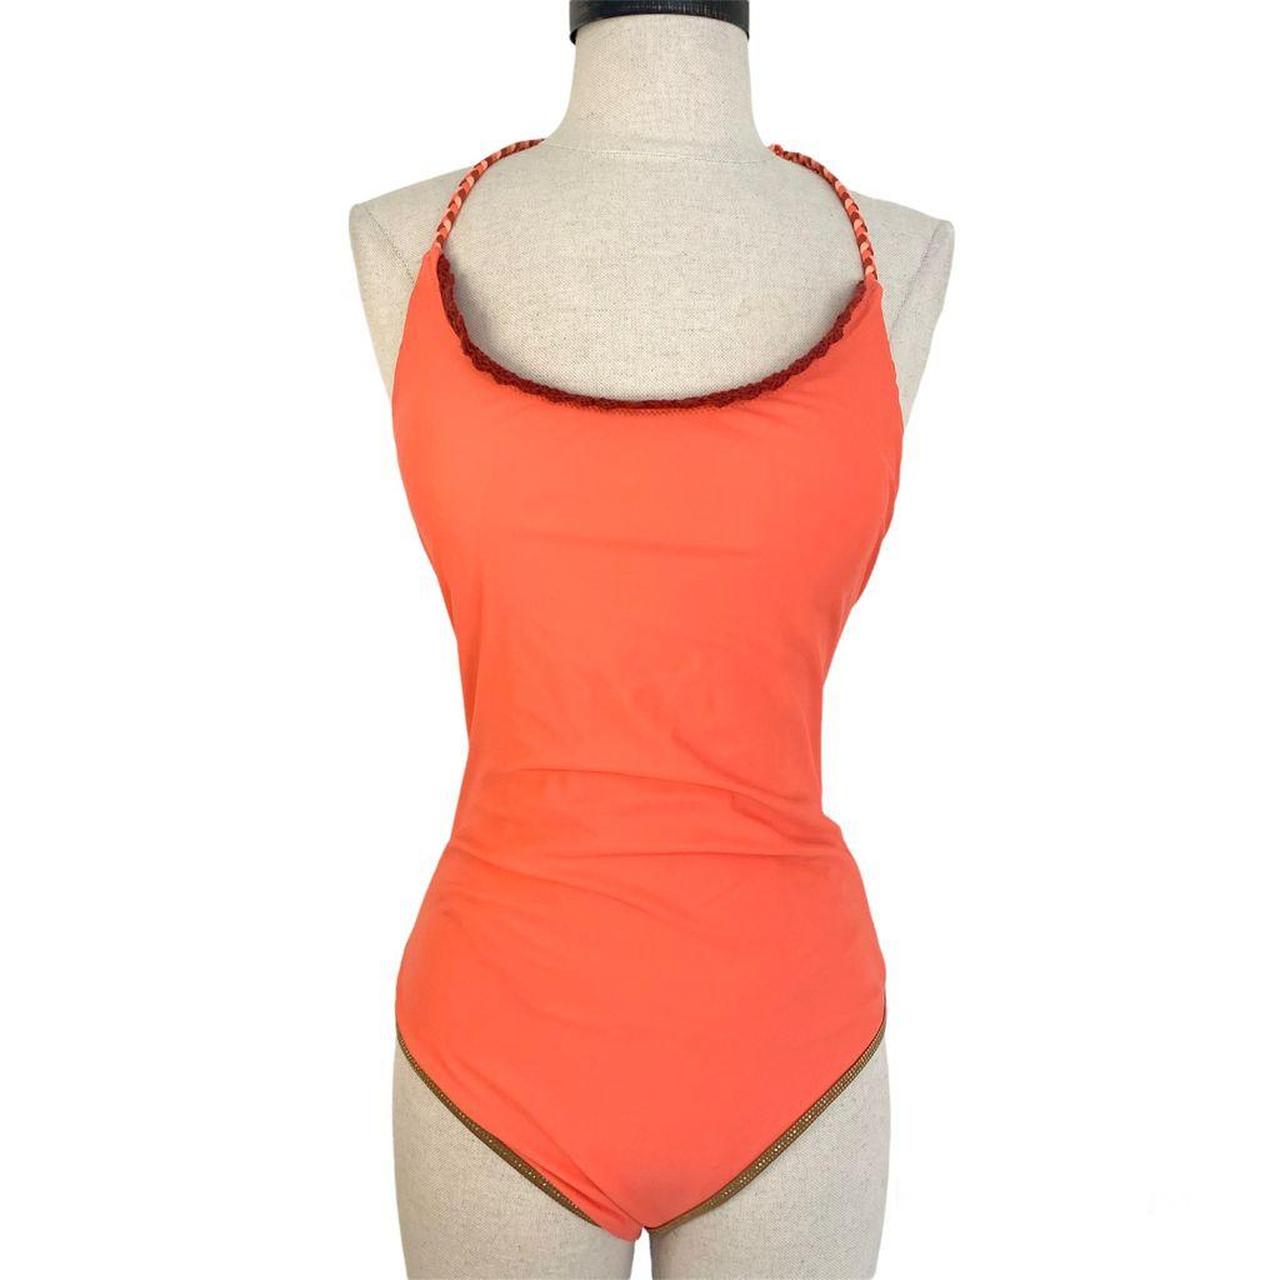 Aerie Cheeky One Piece Swimsuit in coral orange with... - Depop